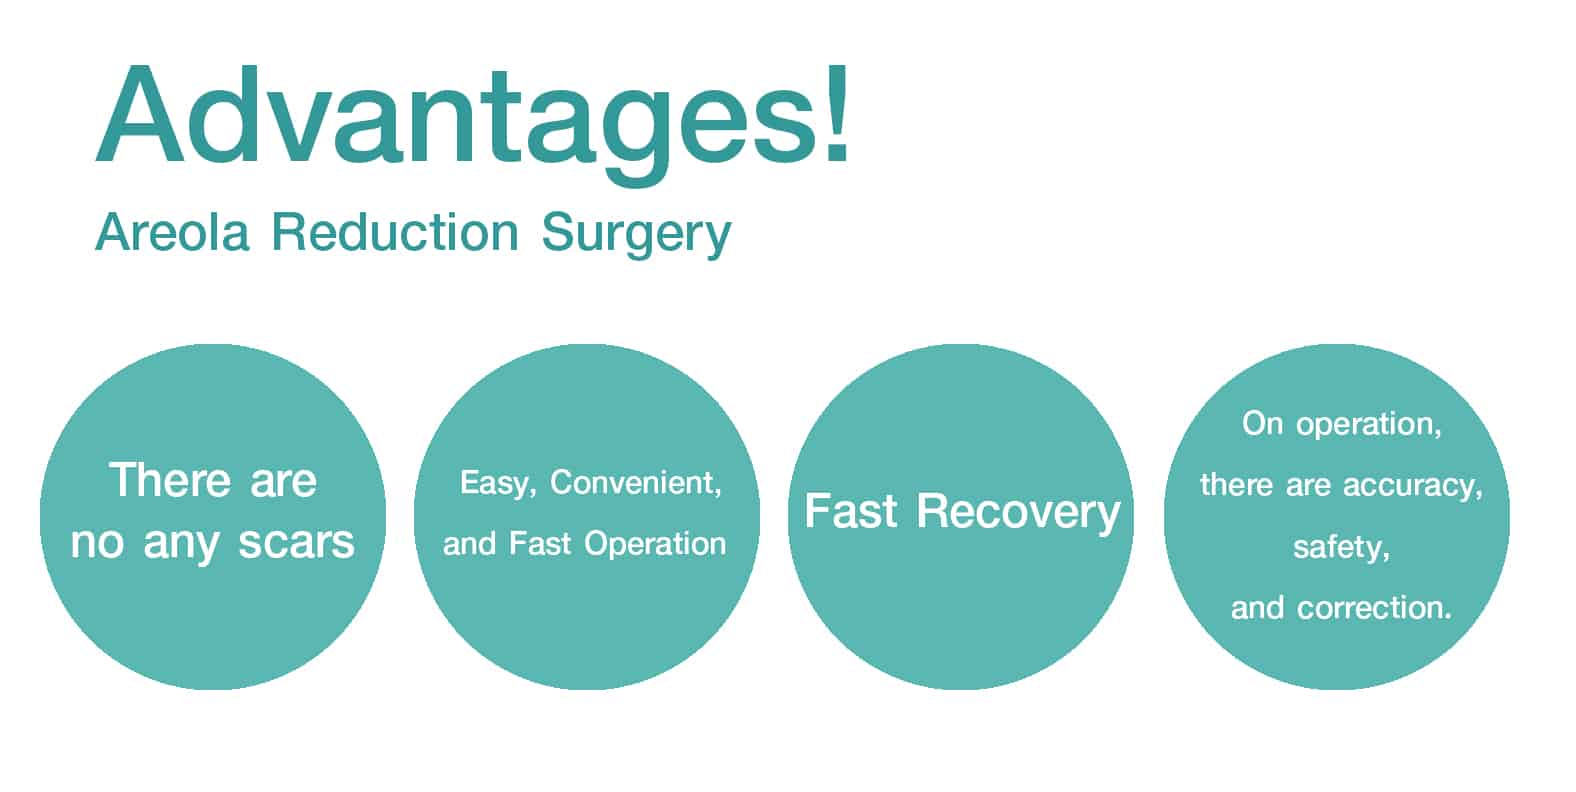 Advantages Areola Reduction Surgery